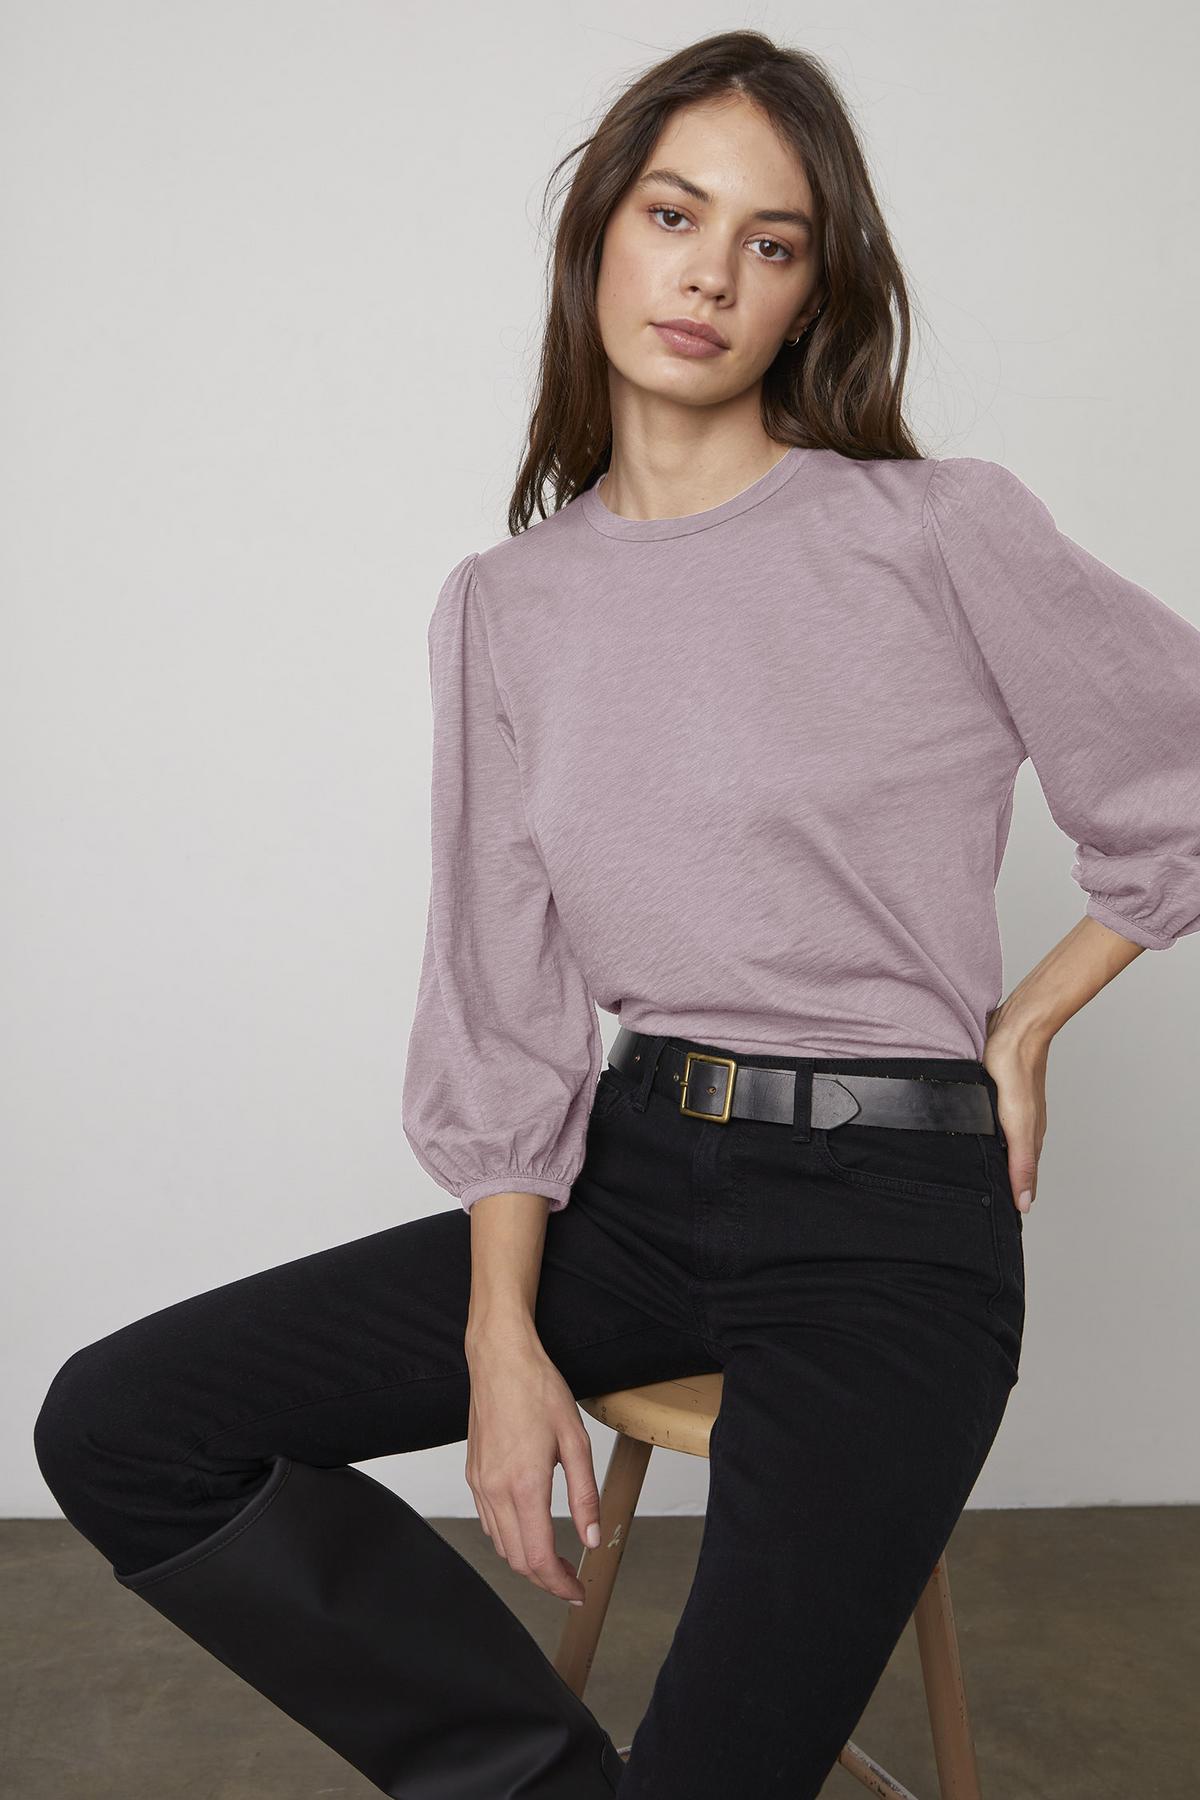   The model is wearing an ANETTE PUFF SLEEVE TEE in cotton slub knit from Velvet by Graham & Spencer. 